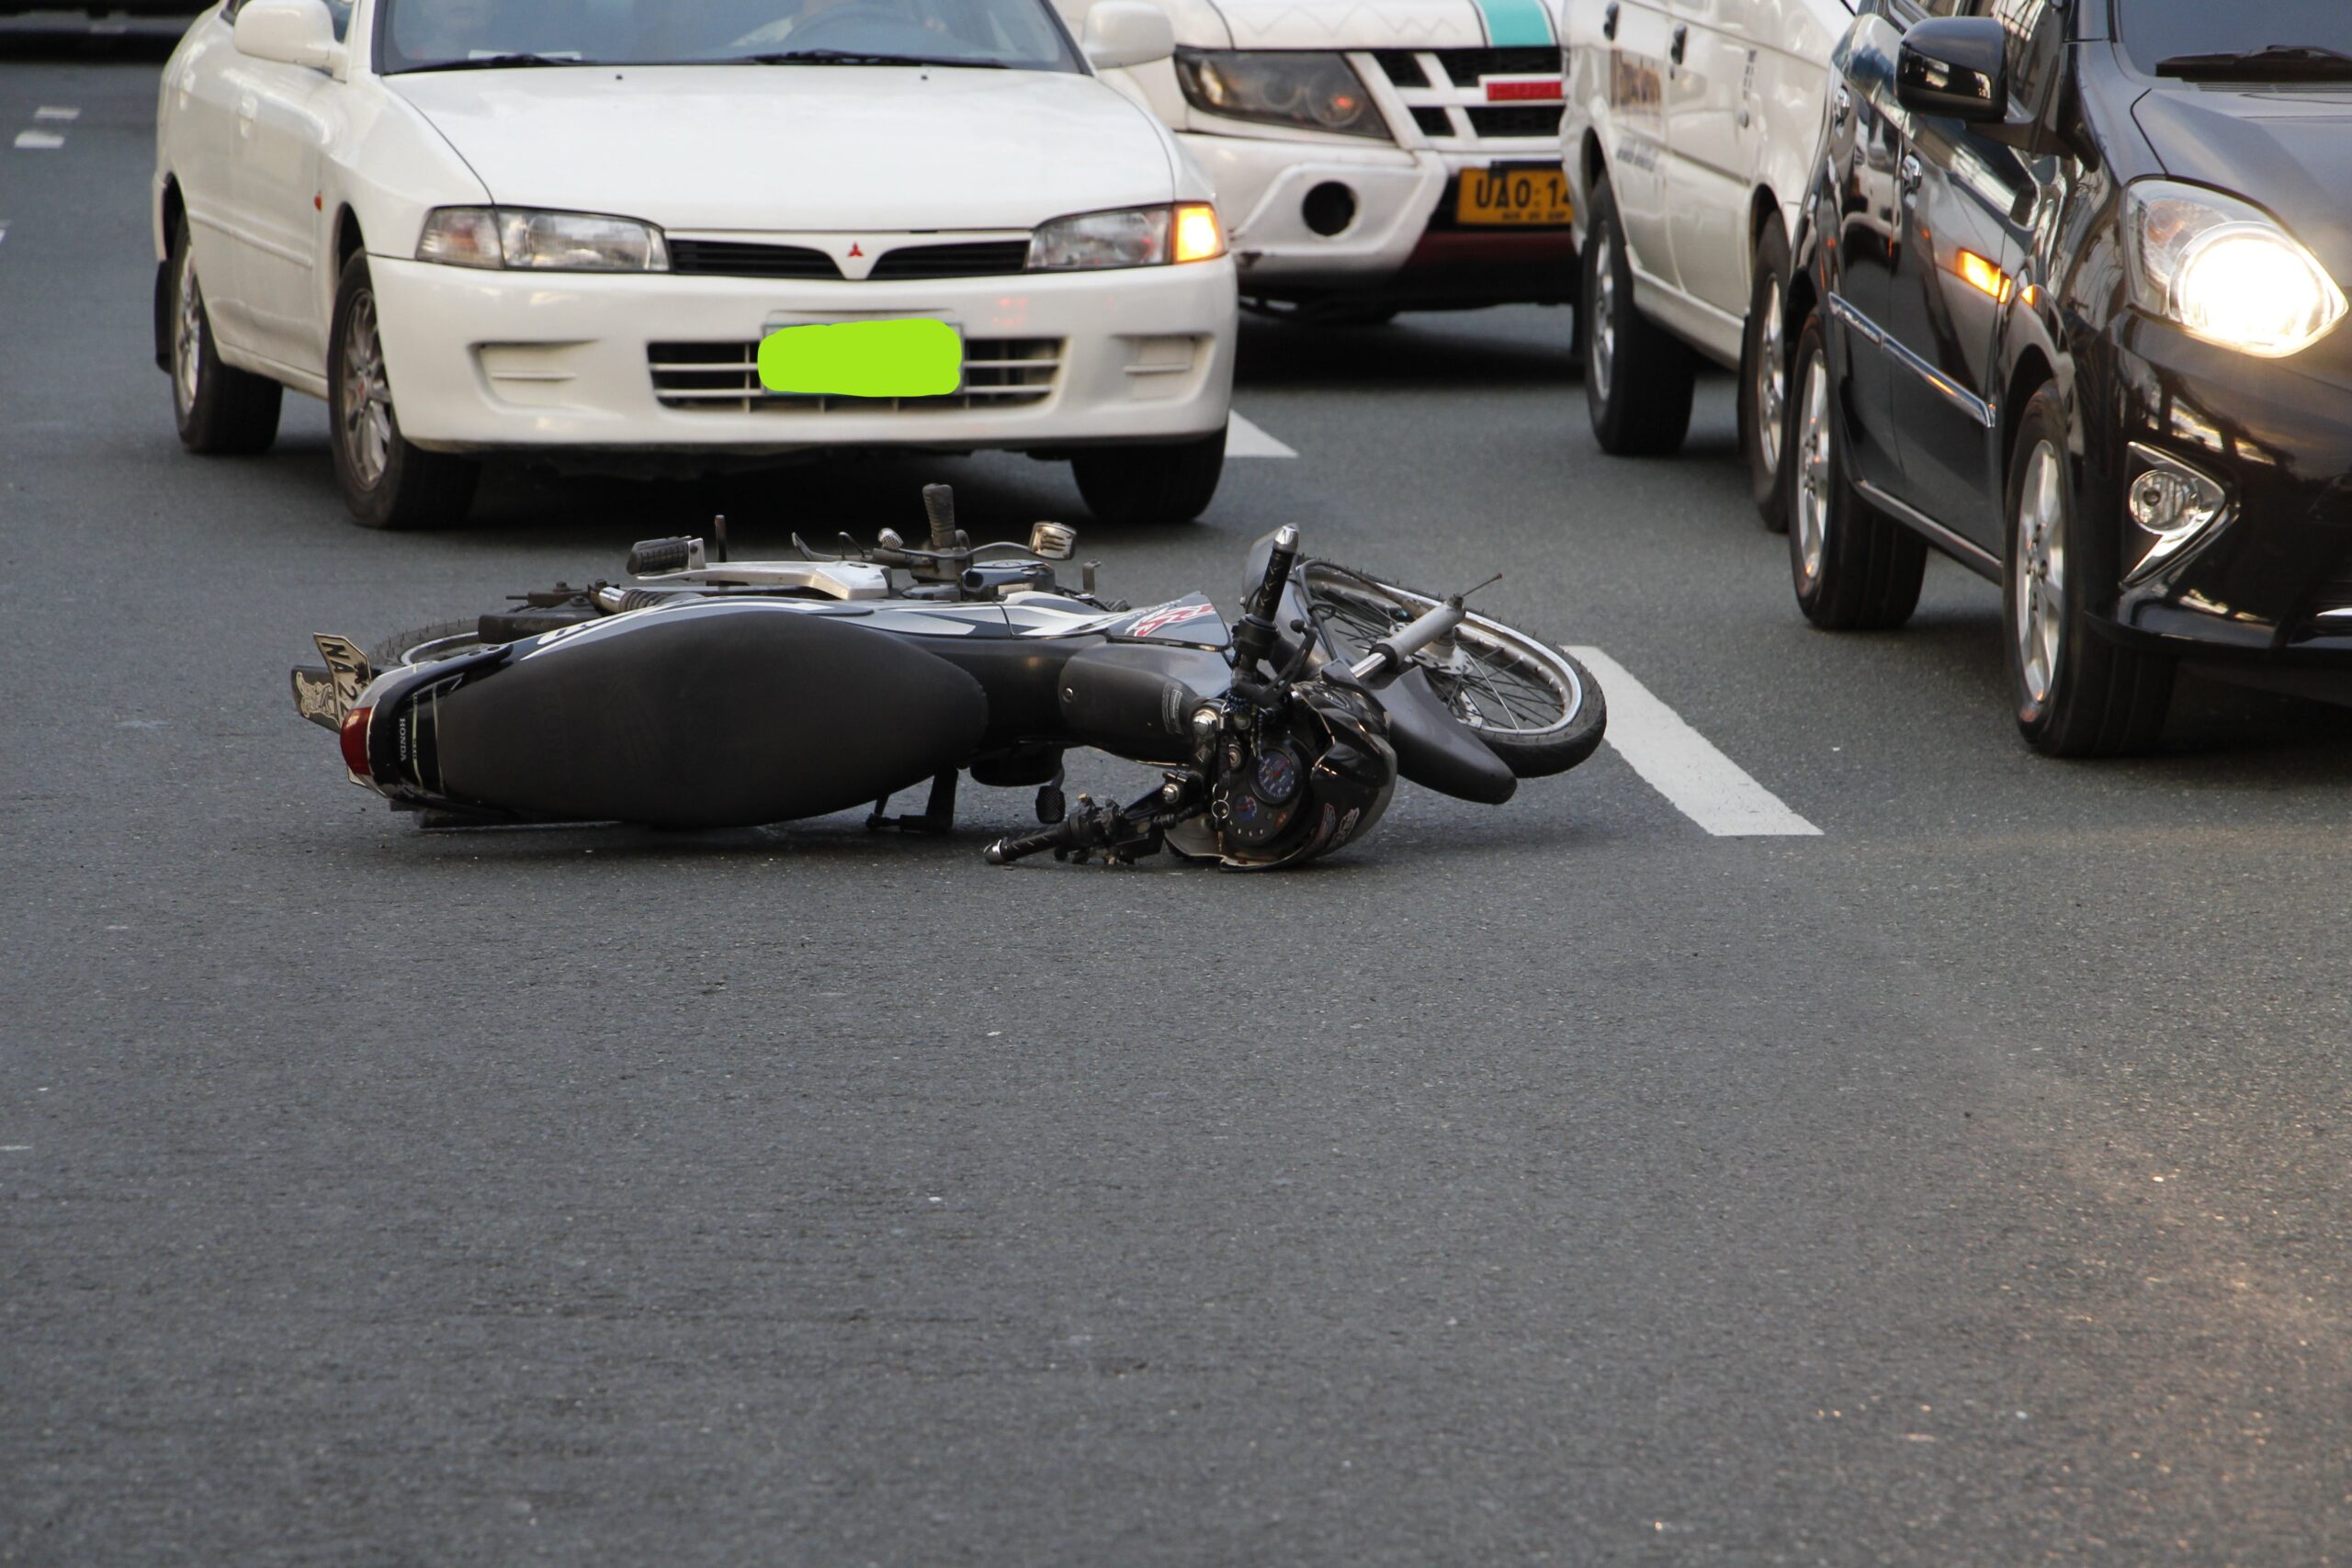 Factors That Impact Motorcycle Accident Settlements in Chicago